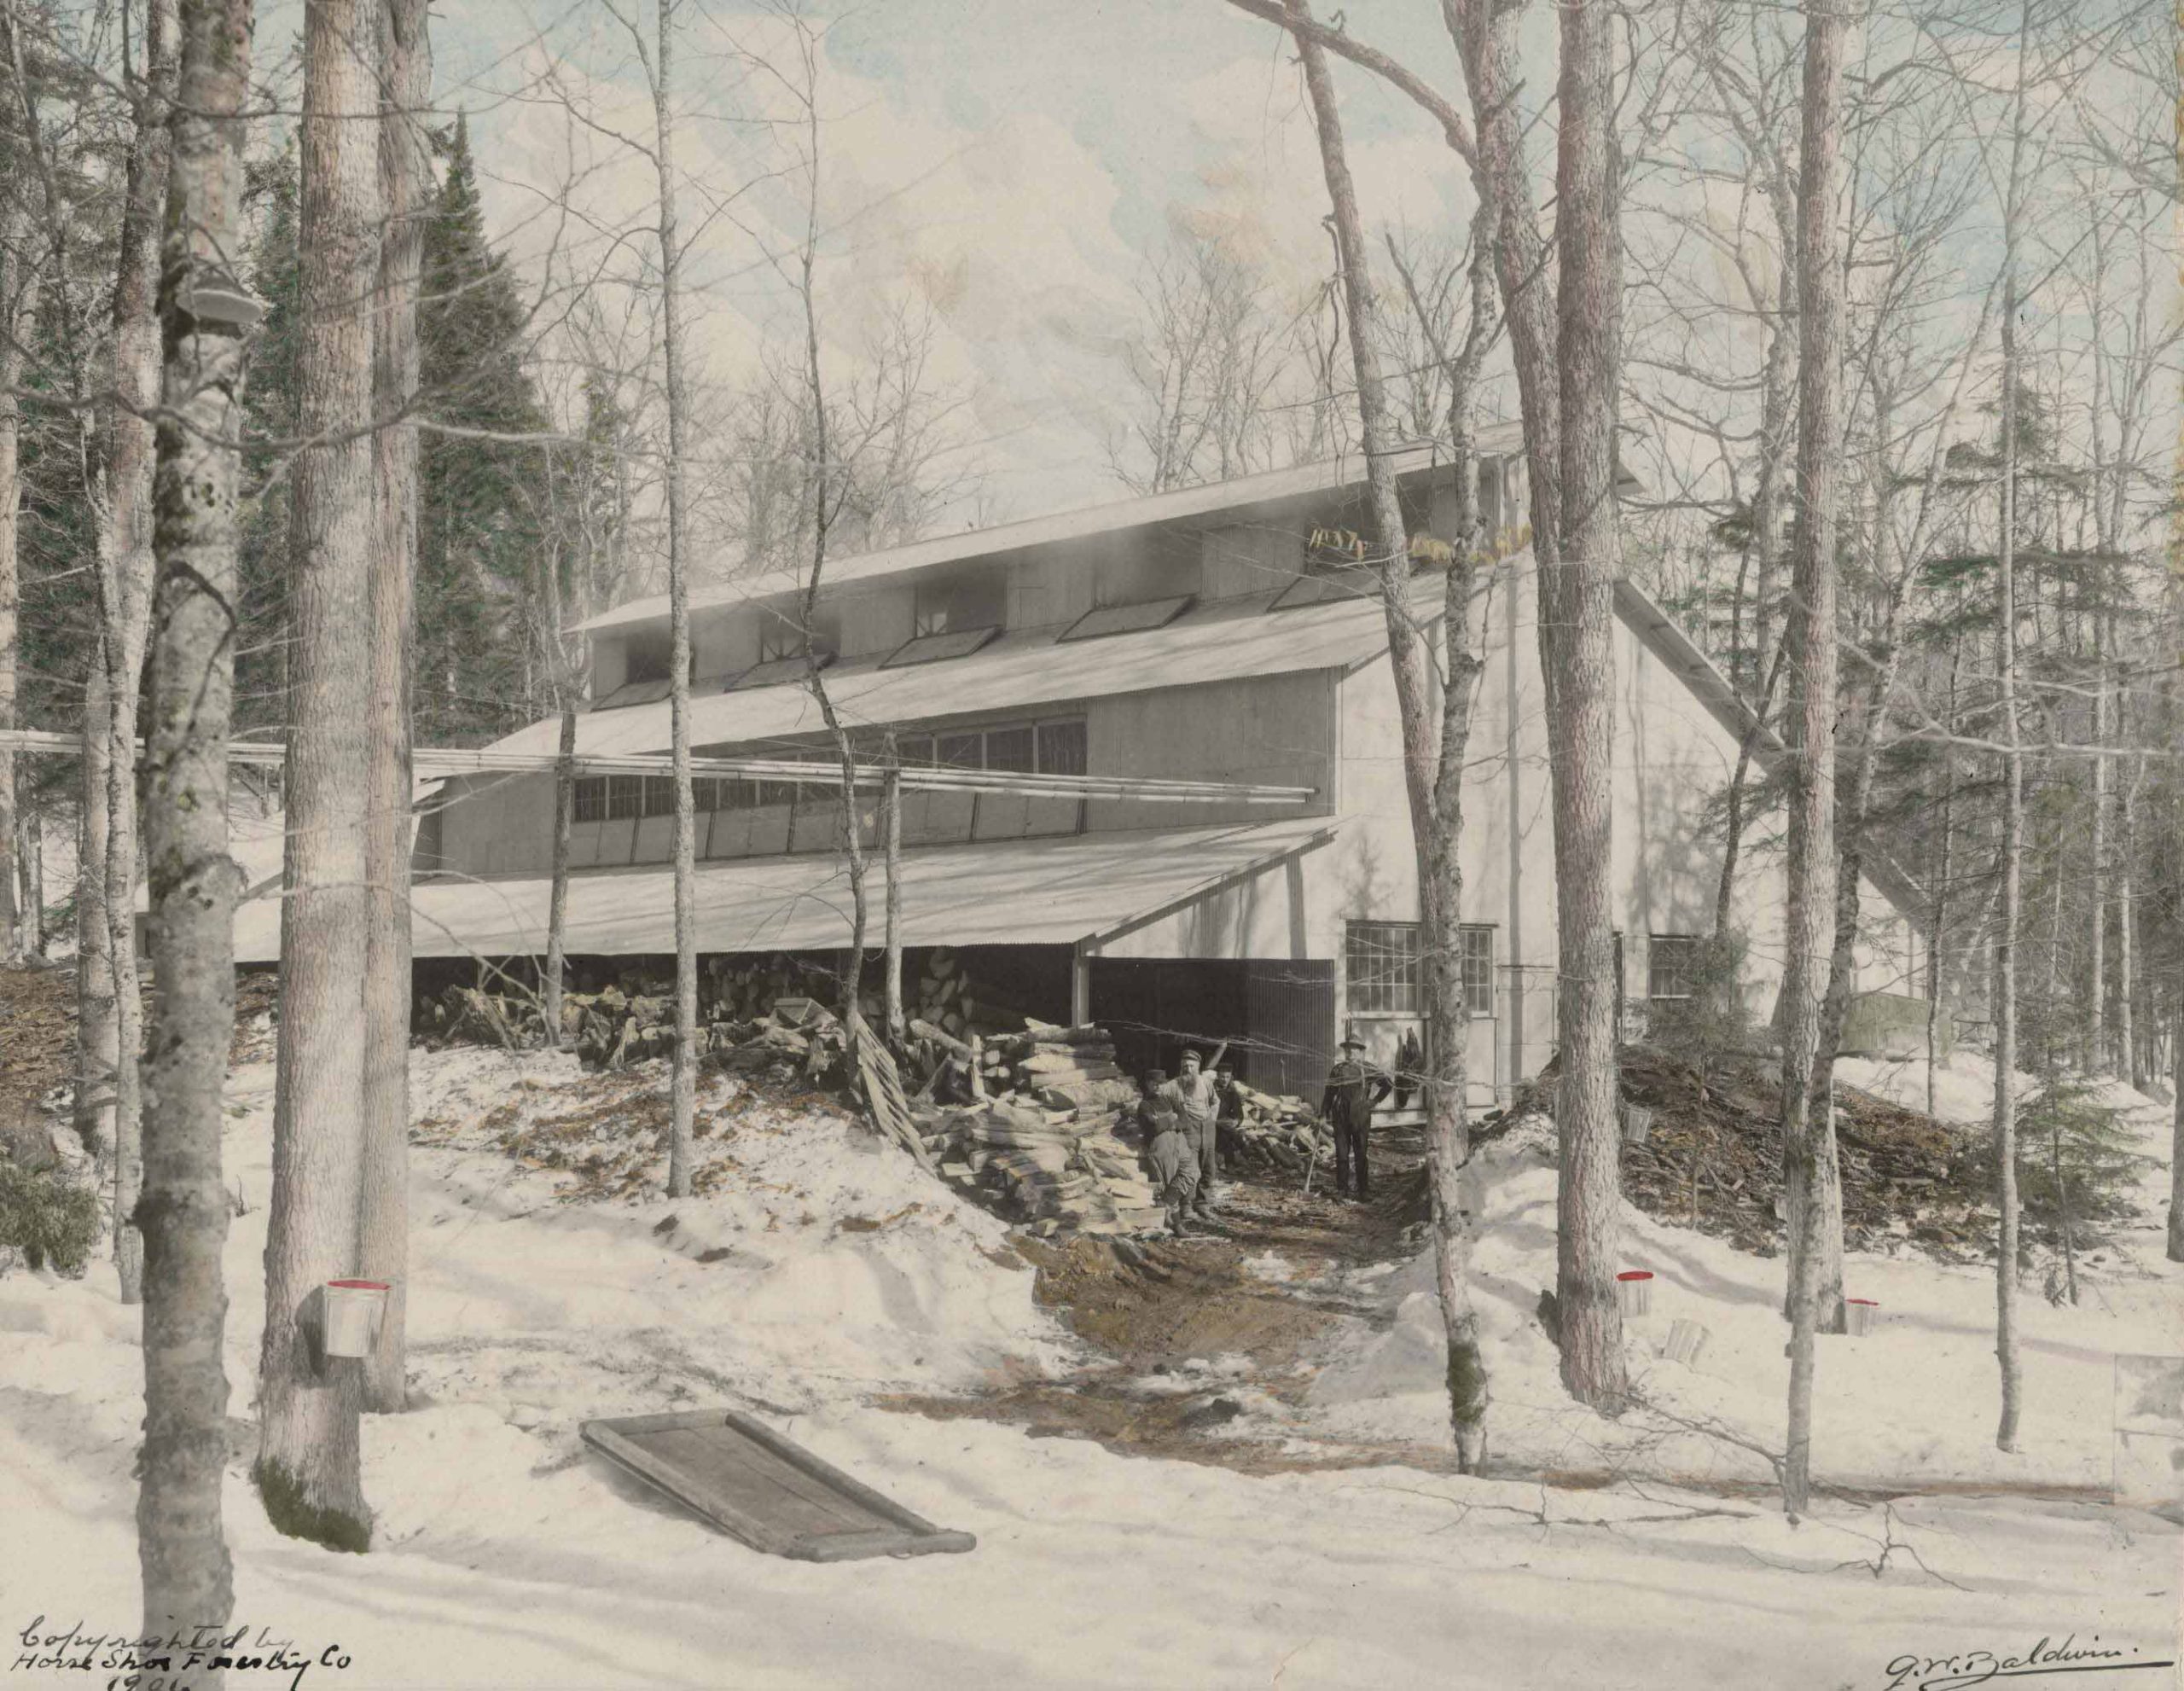 Historic photograph of A.A. Low's sugarhouse